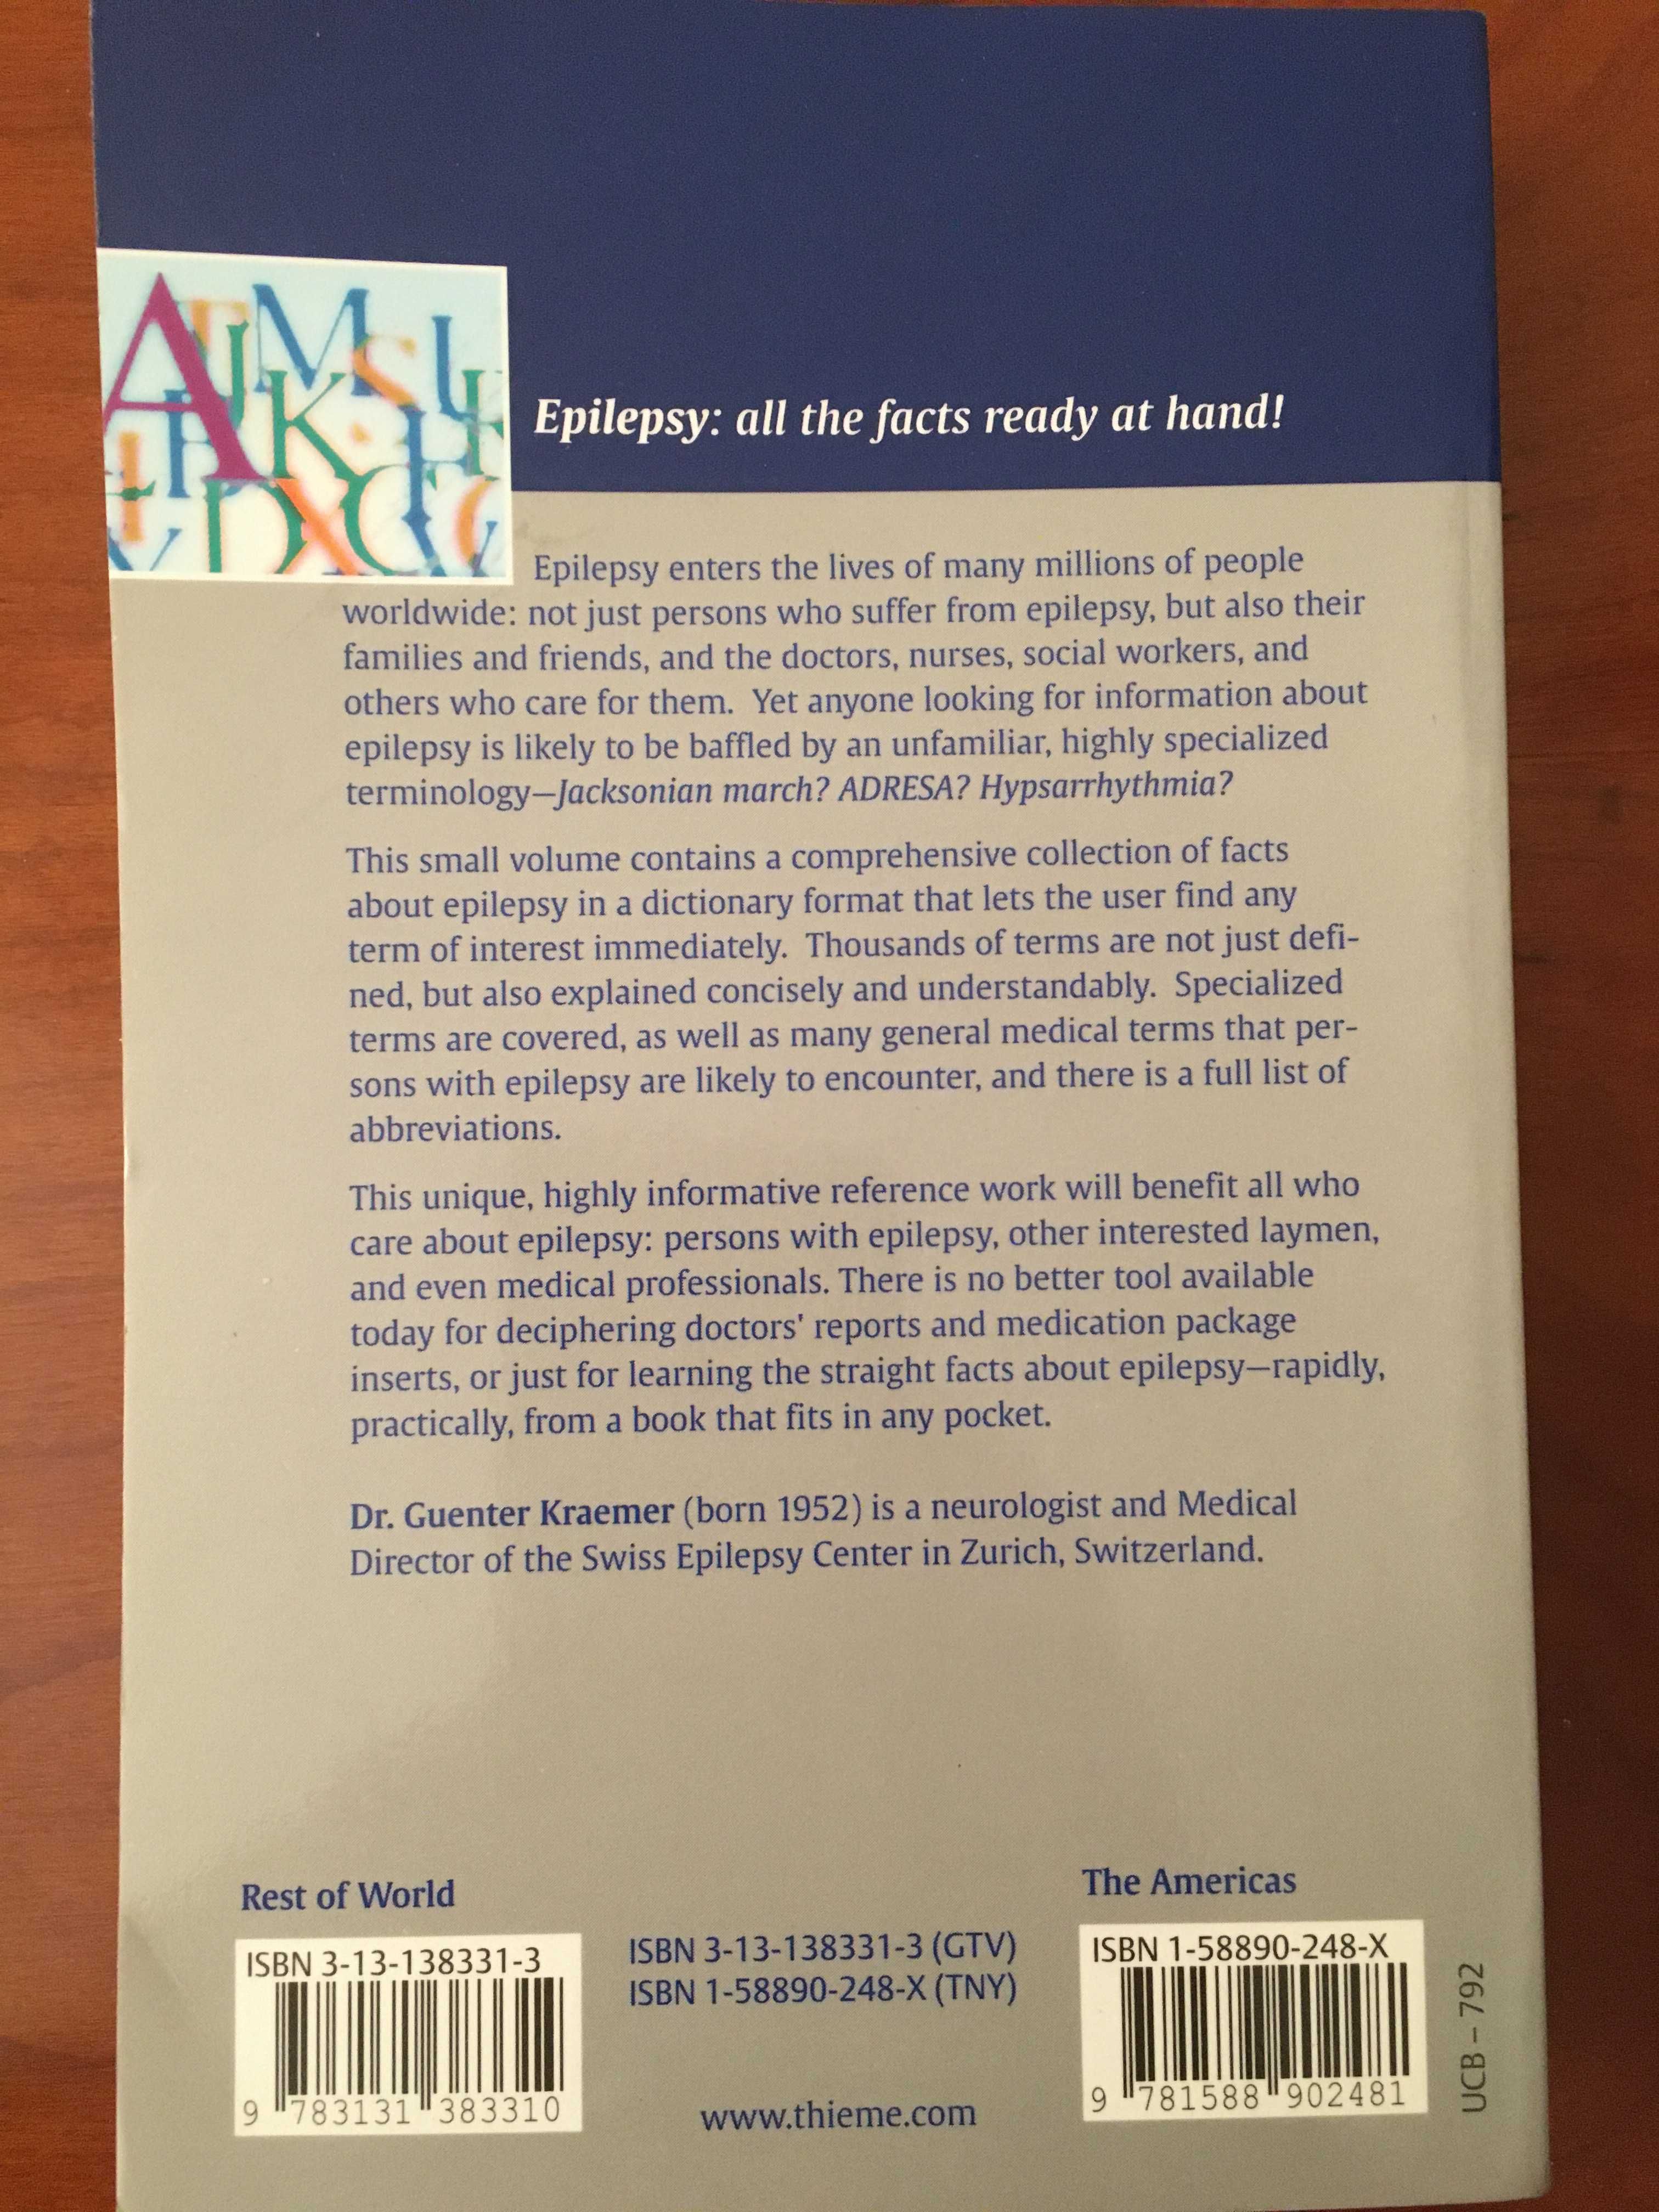 Epilepsy from A to Z - A Dictionary of Medical Terms